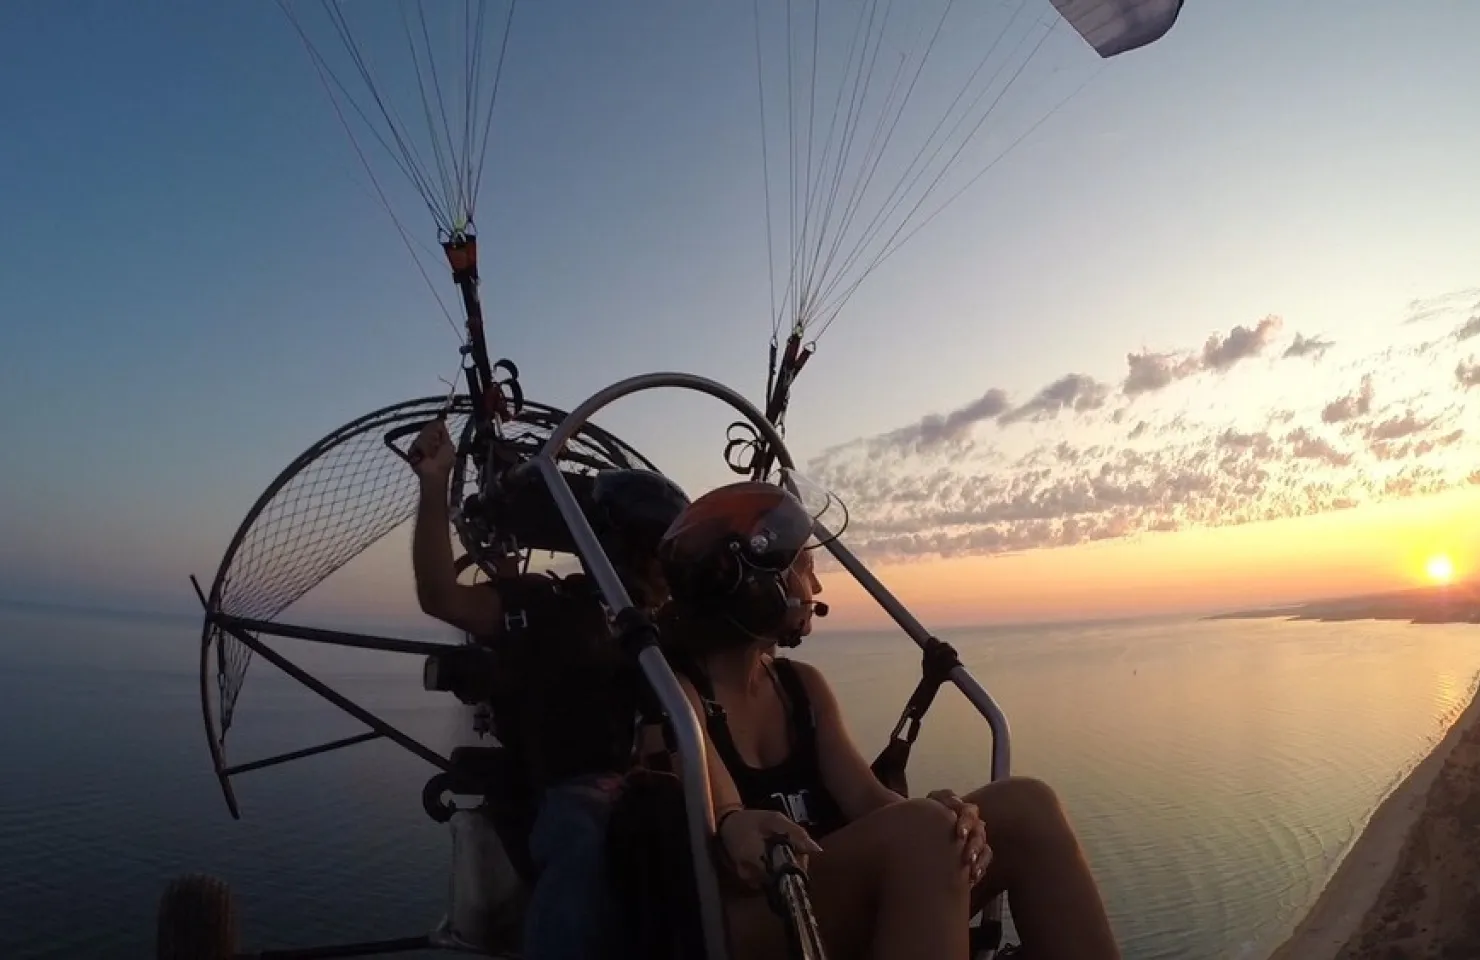 Sunset Paratrike in Algarve - Faro Activities and things to do